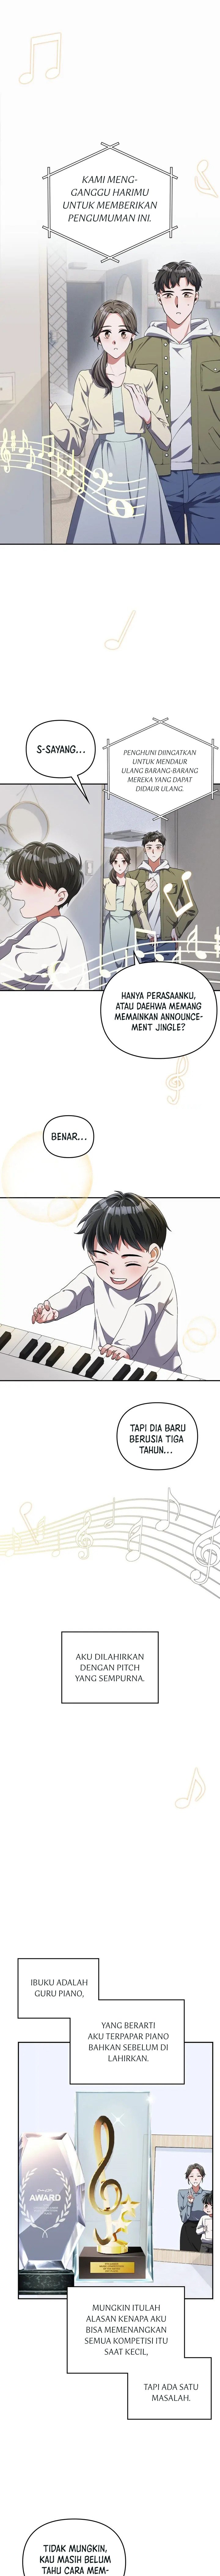 The Life of a Piano Genius Chapter 01 Image 1